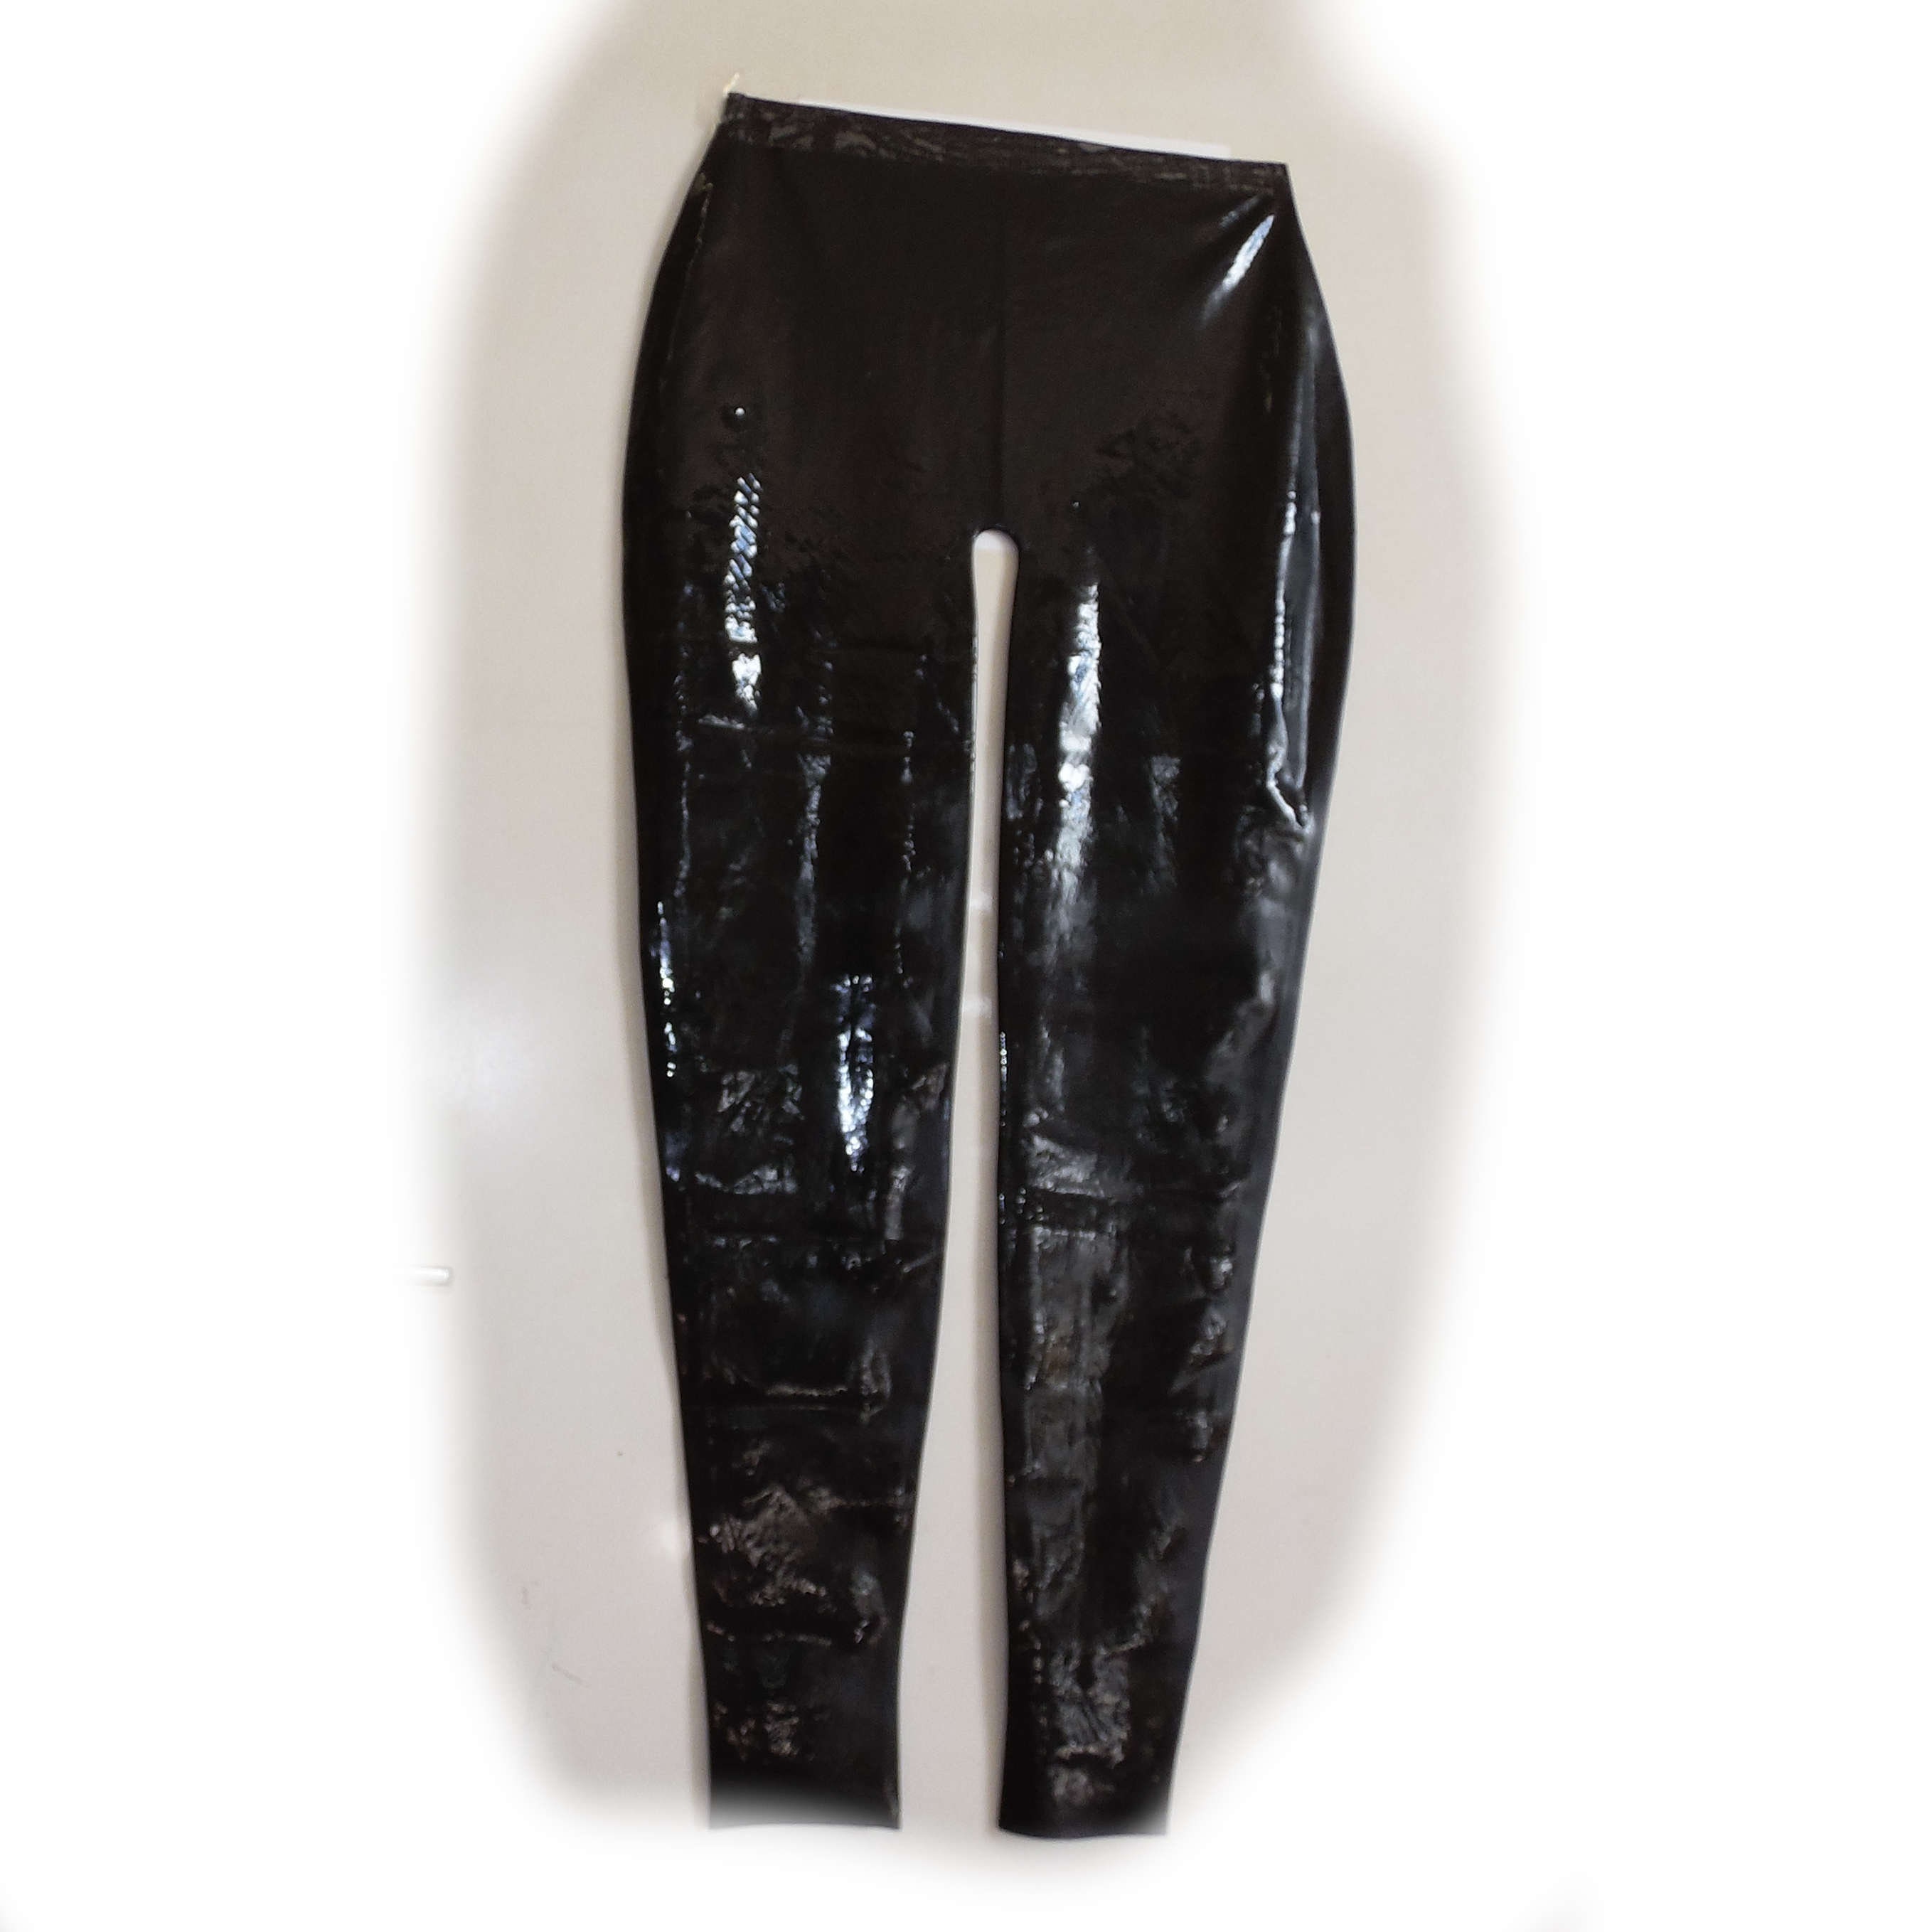 Black Rubber High Side Pants silicone / Latex Mix Knickers, Pants